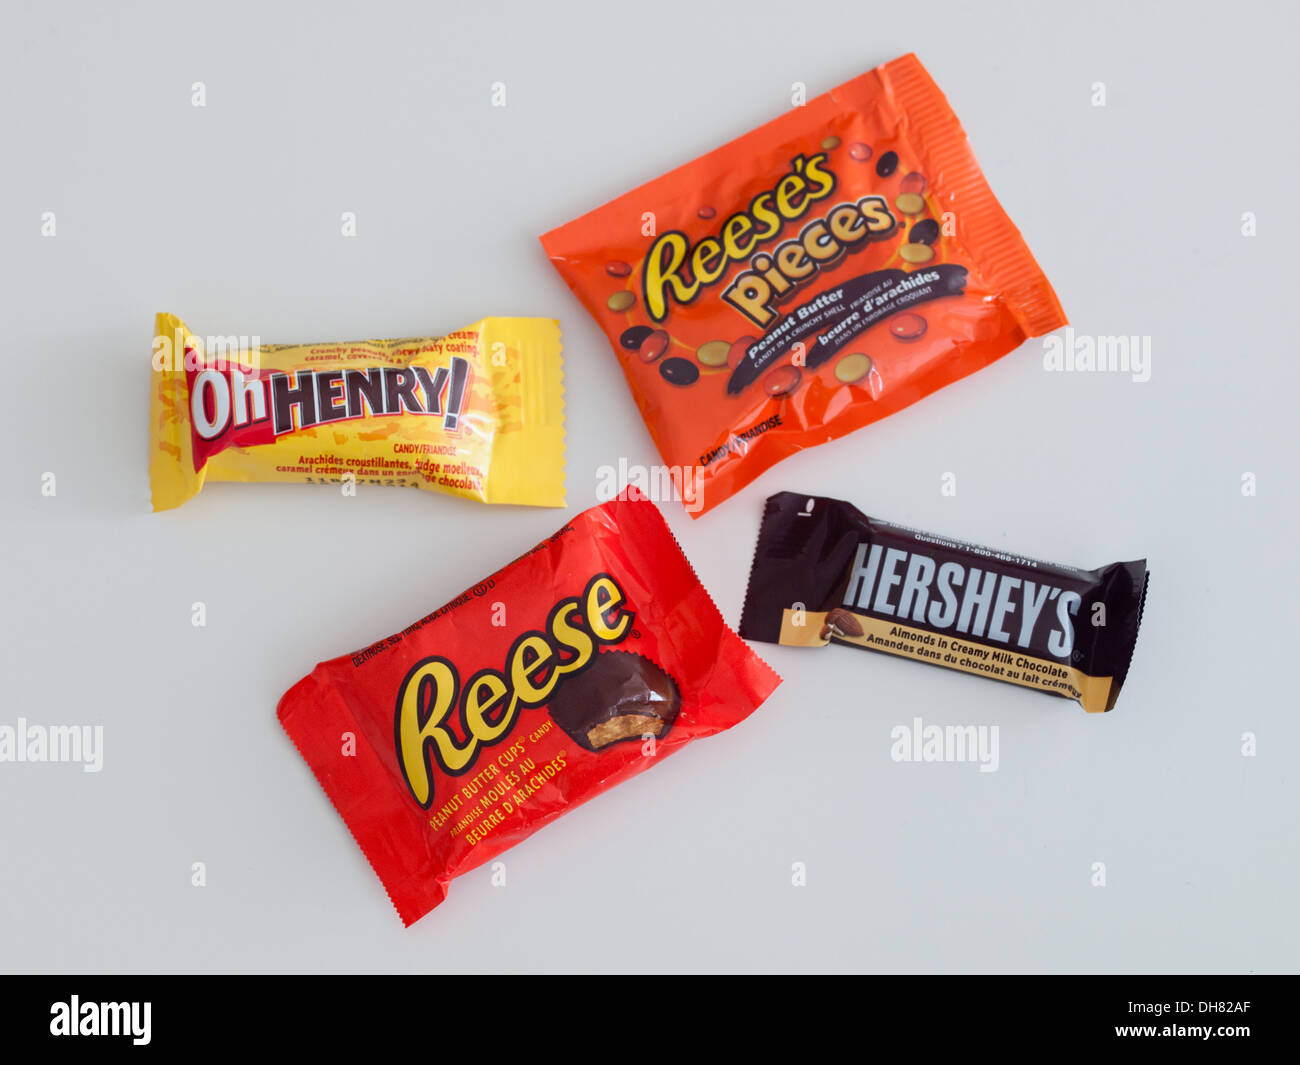 https://c8.alamy.com/comp/DH82AF/various-chocolate-and-candy-manufactured-by-the-hershey-company-canadian-DH82AF.jpg